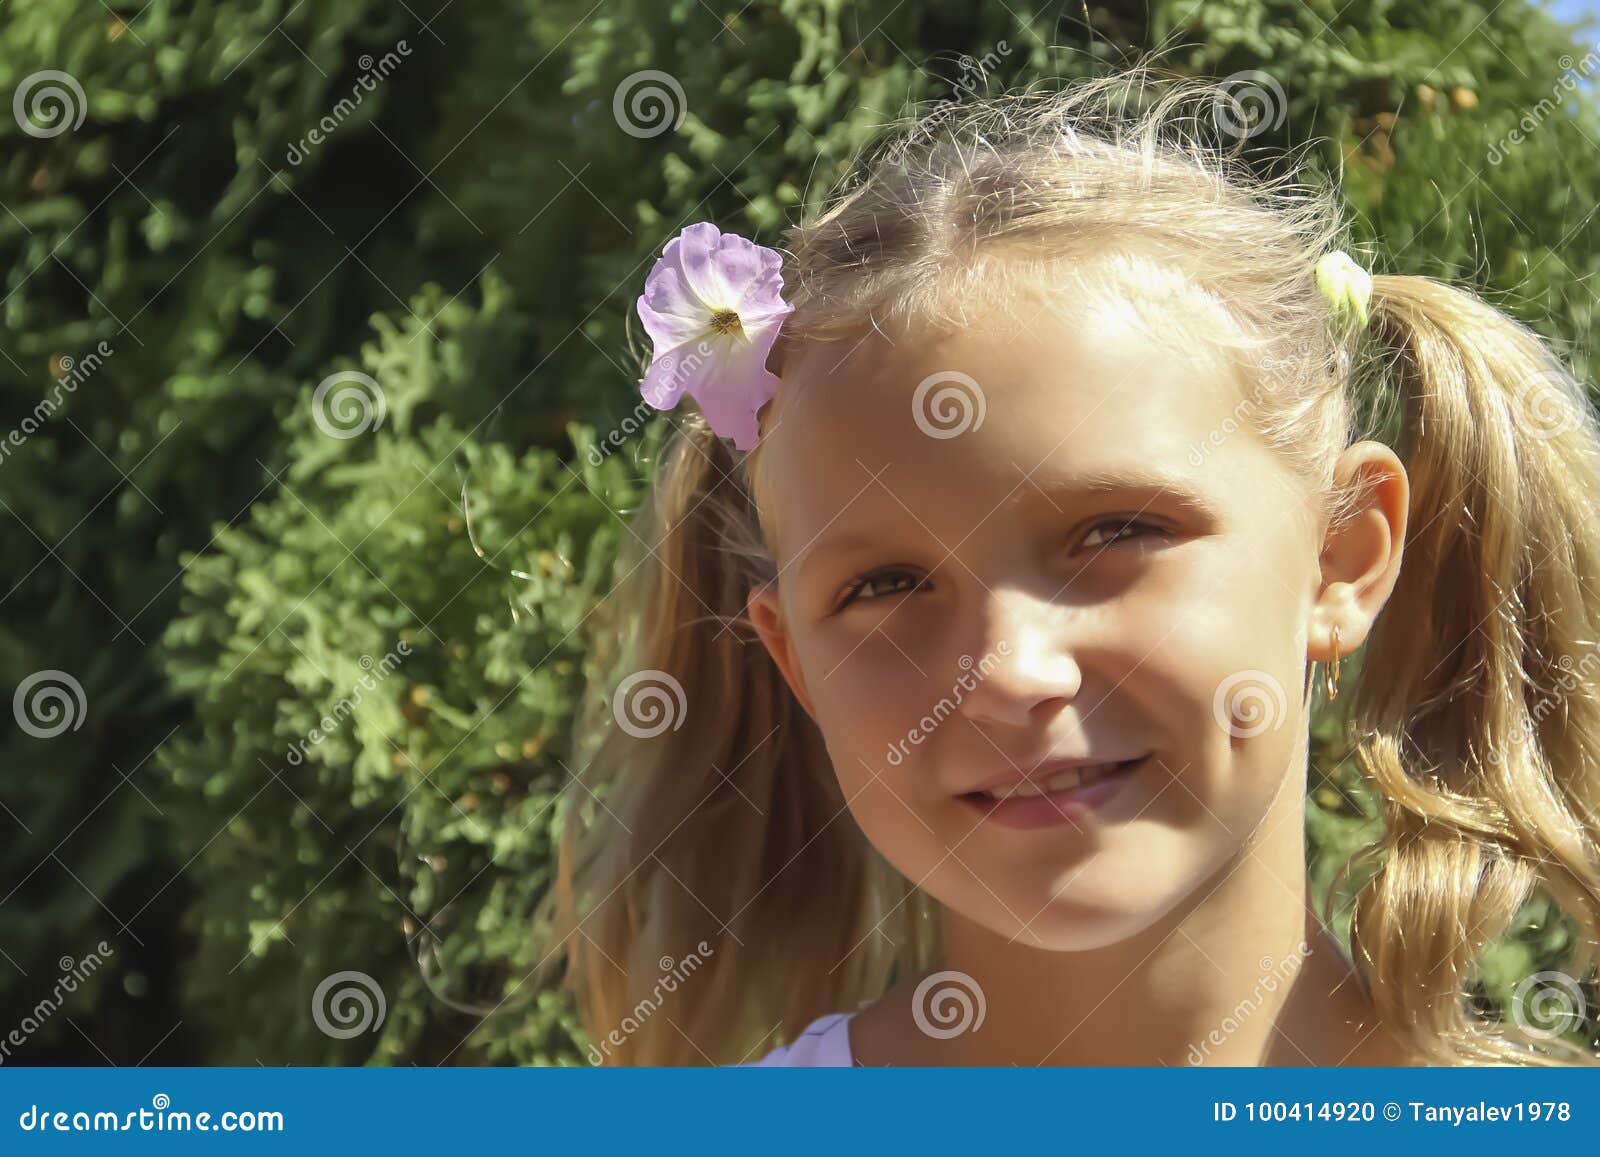 Little Girl, Portrait with Flower Stock Photo - Image of blond, beauty ...